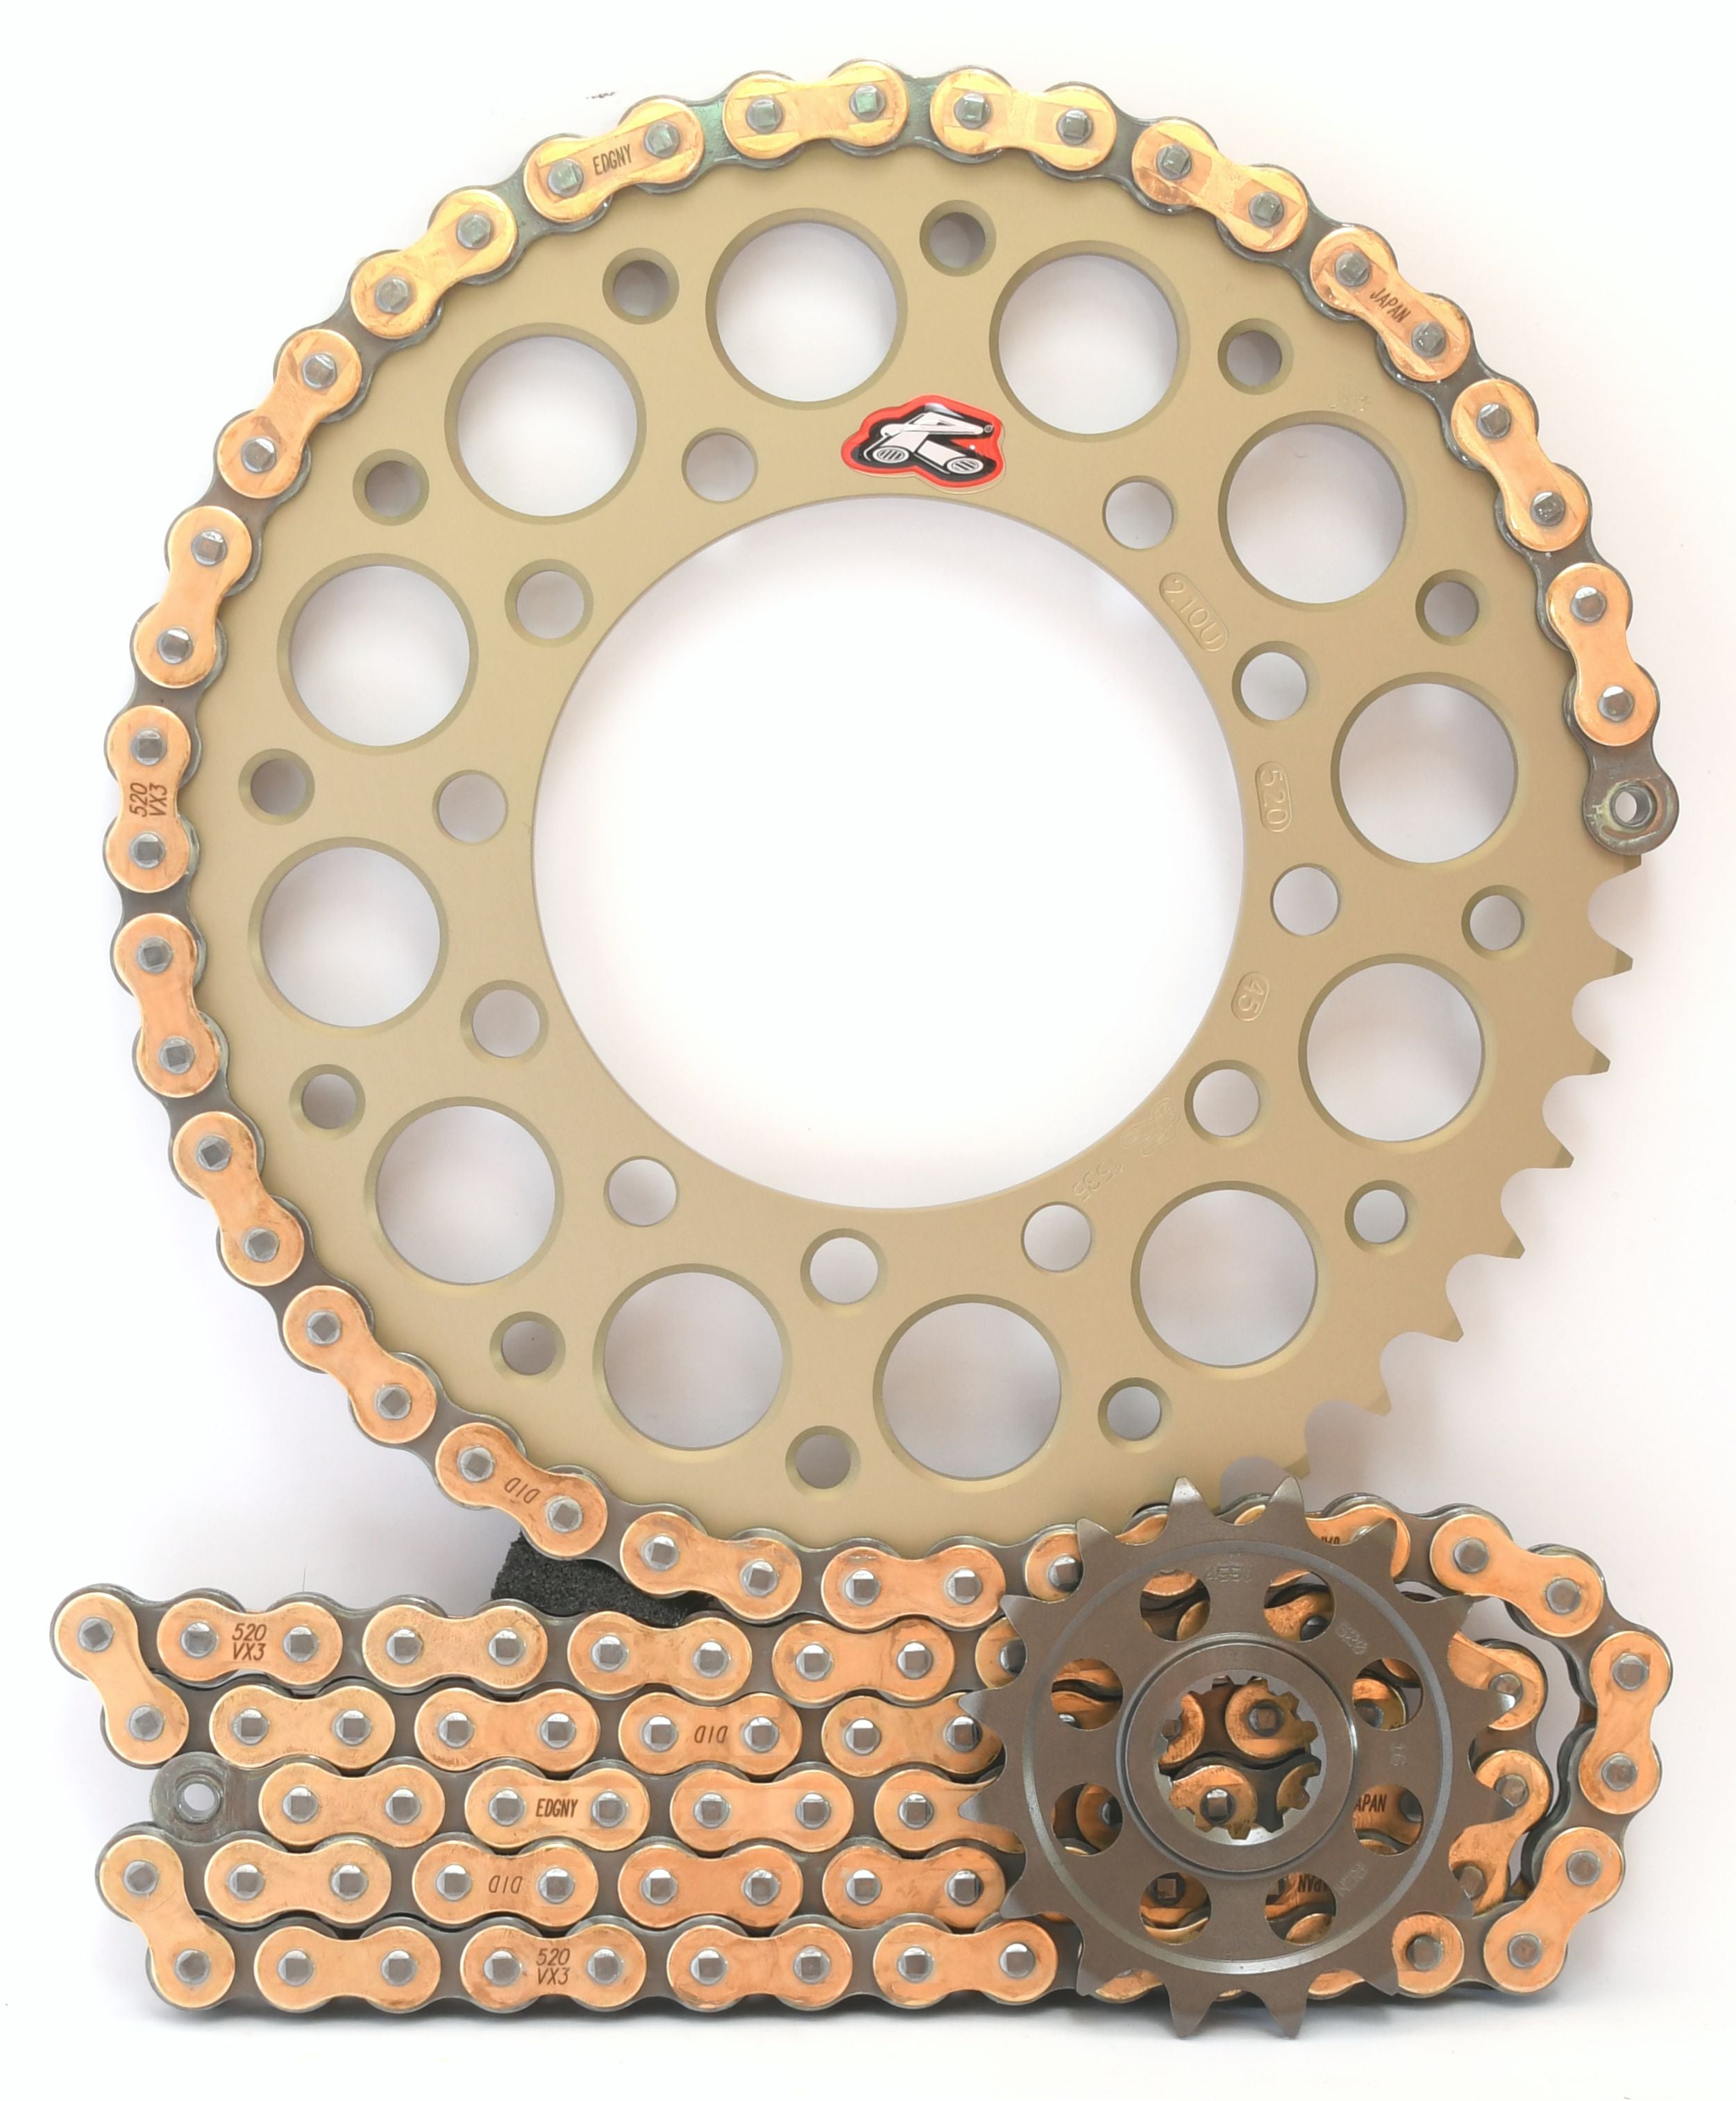 Renthal Ultralight and DID Chain & Sprocket Kit for Kawasaki ZX6R 2005-2006 - Standard Gearing